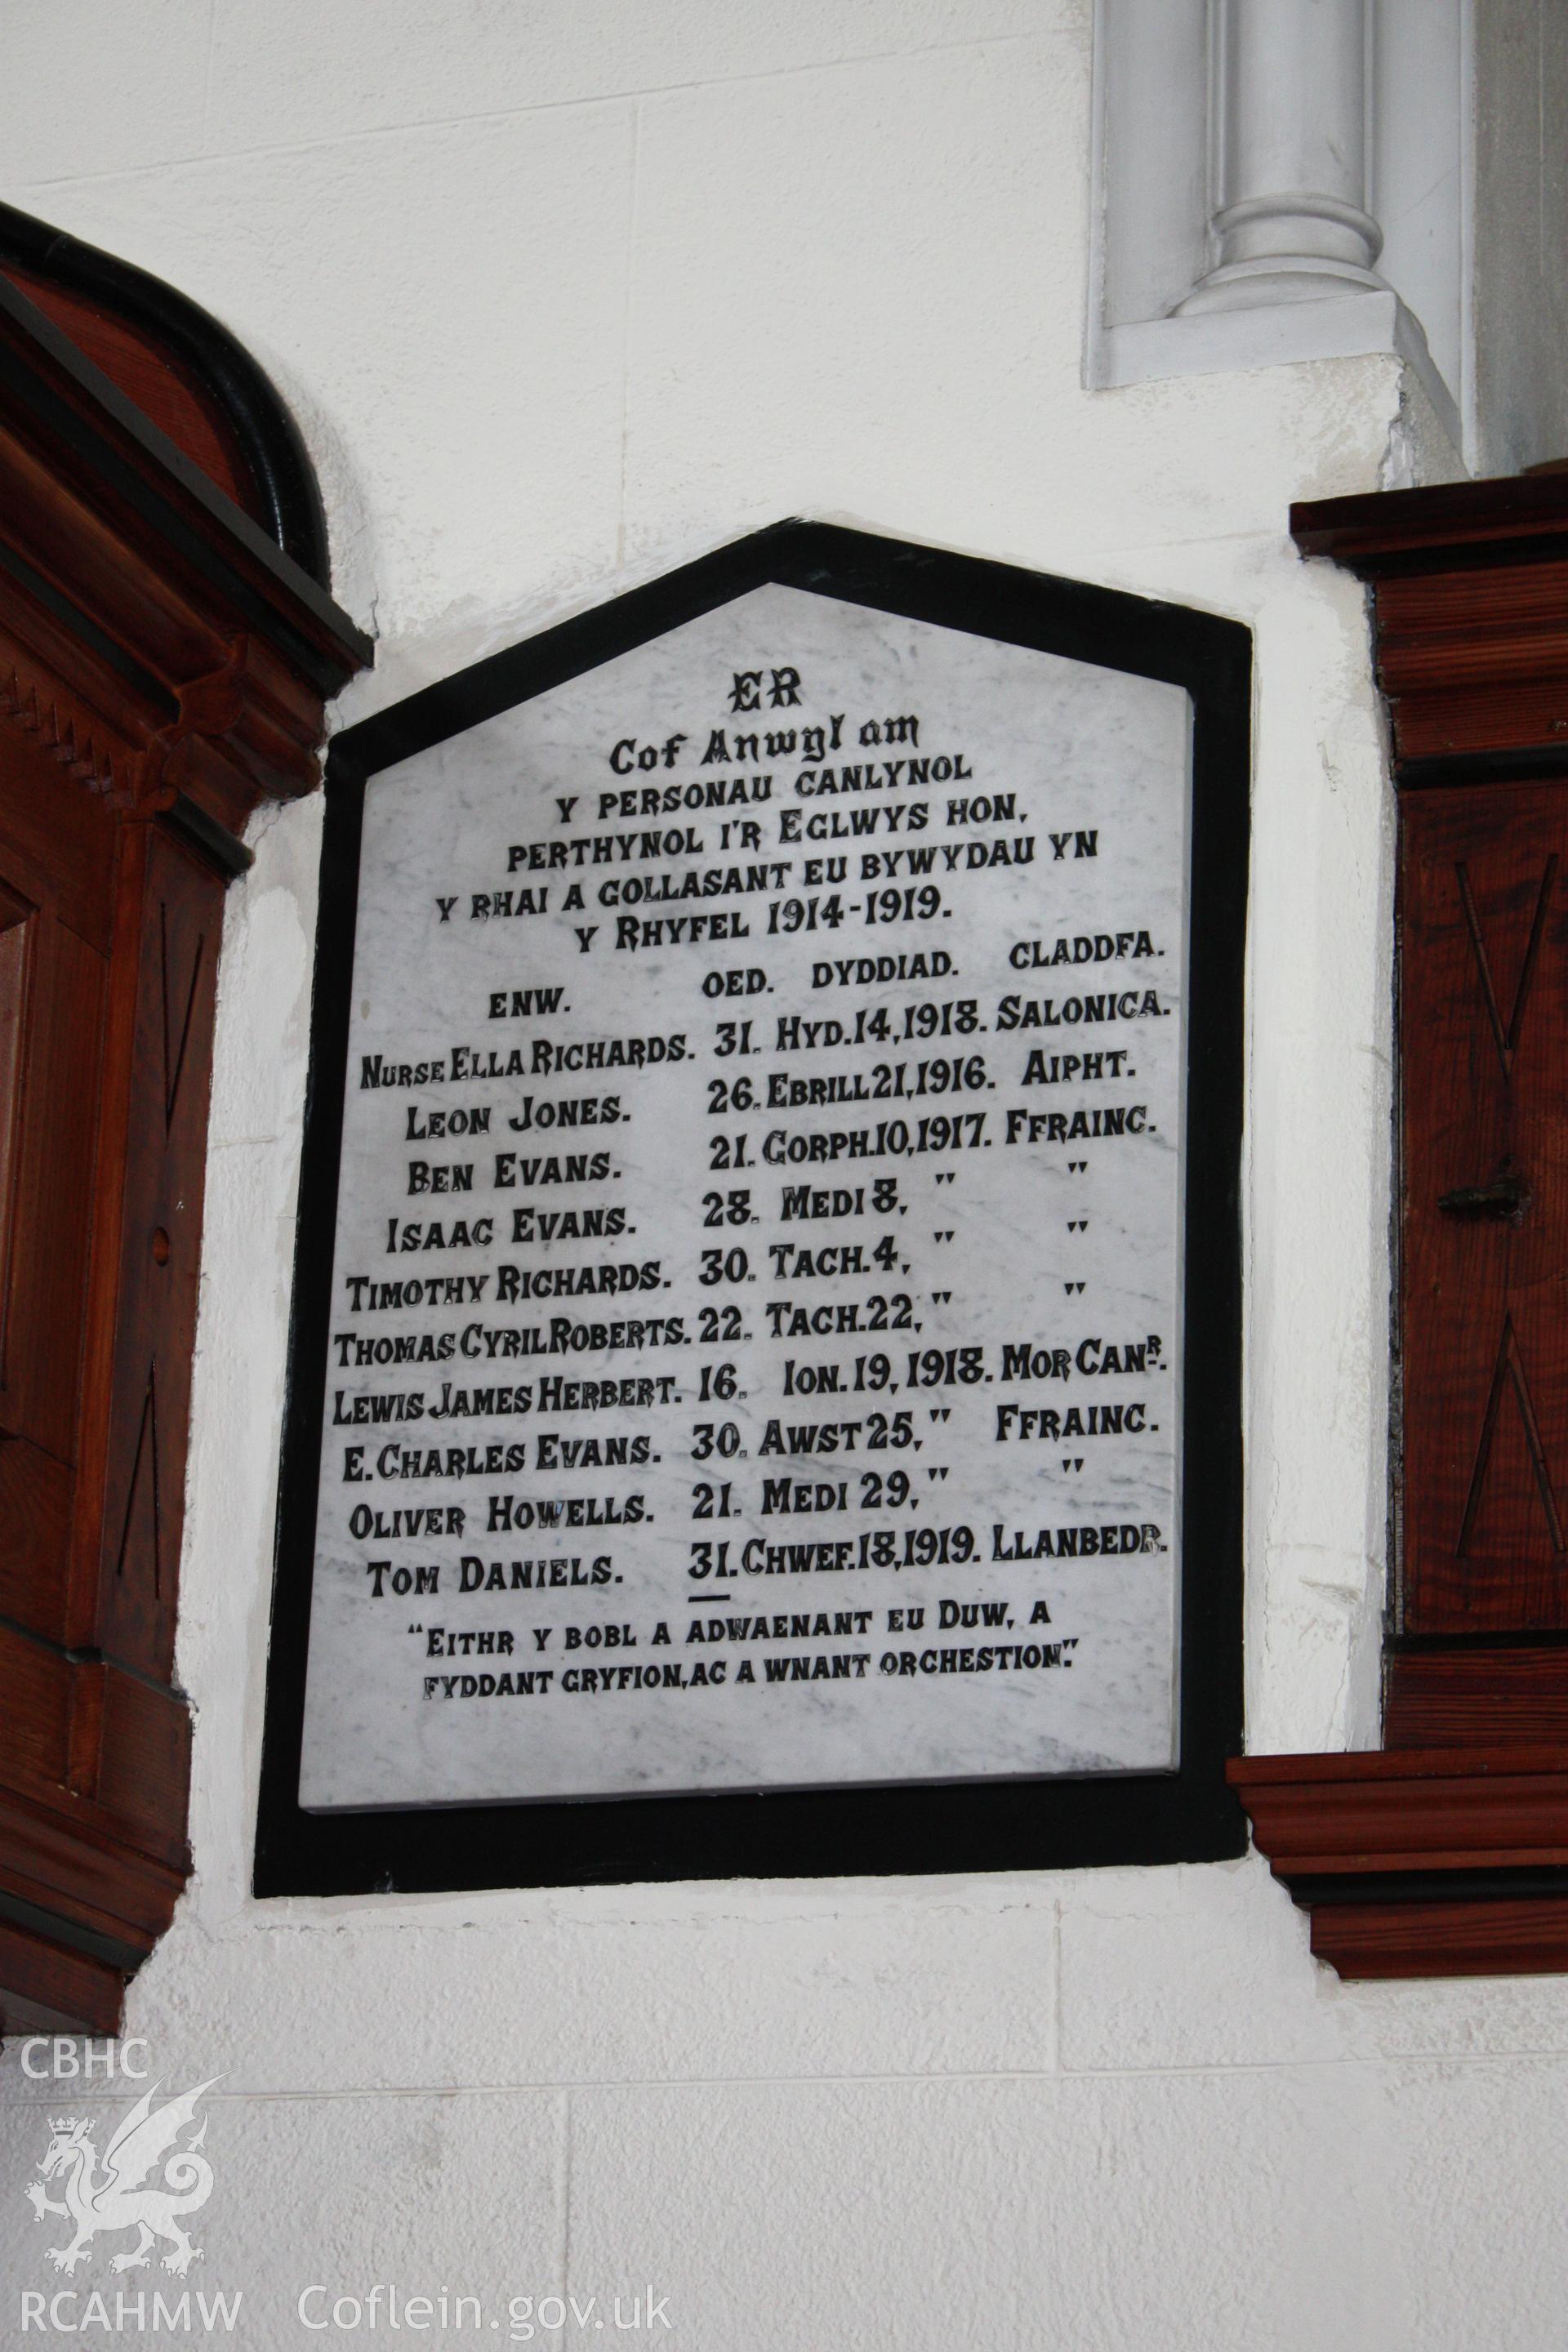 Soar chapel, detail of memorial plaque to members killed in the first world war.